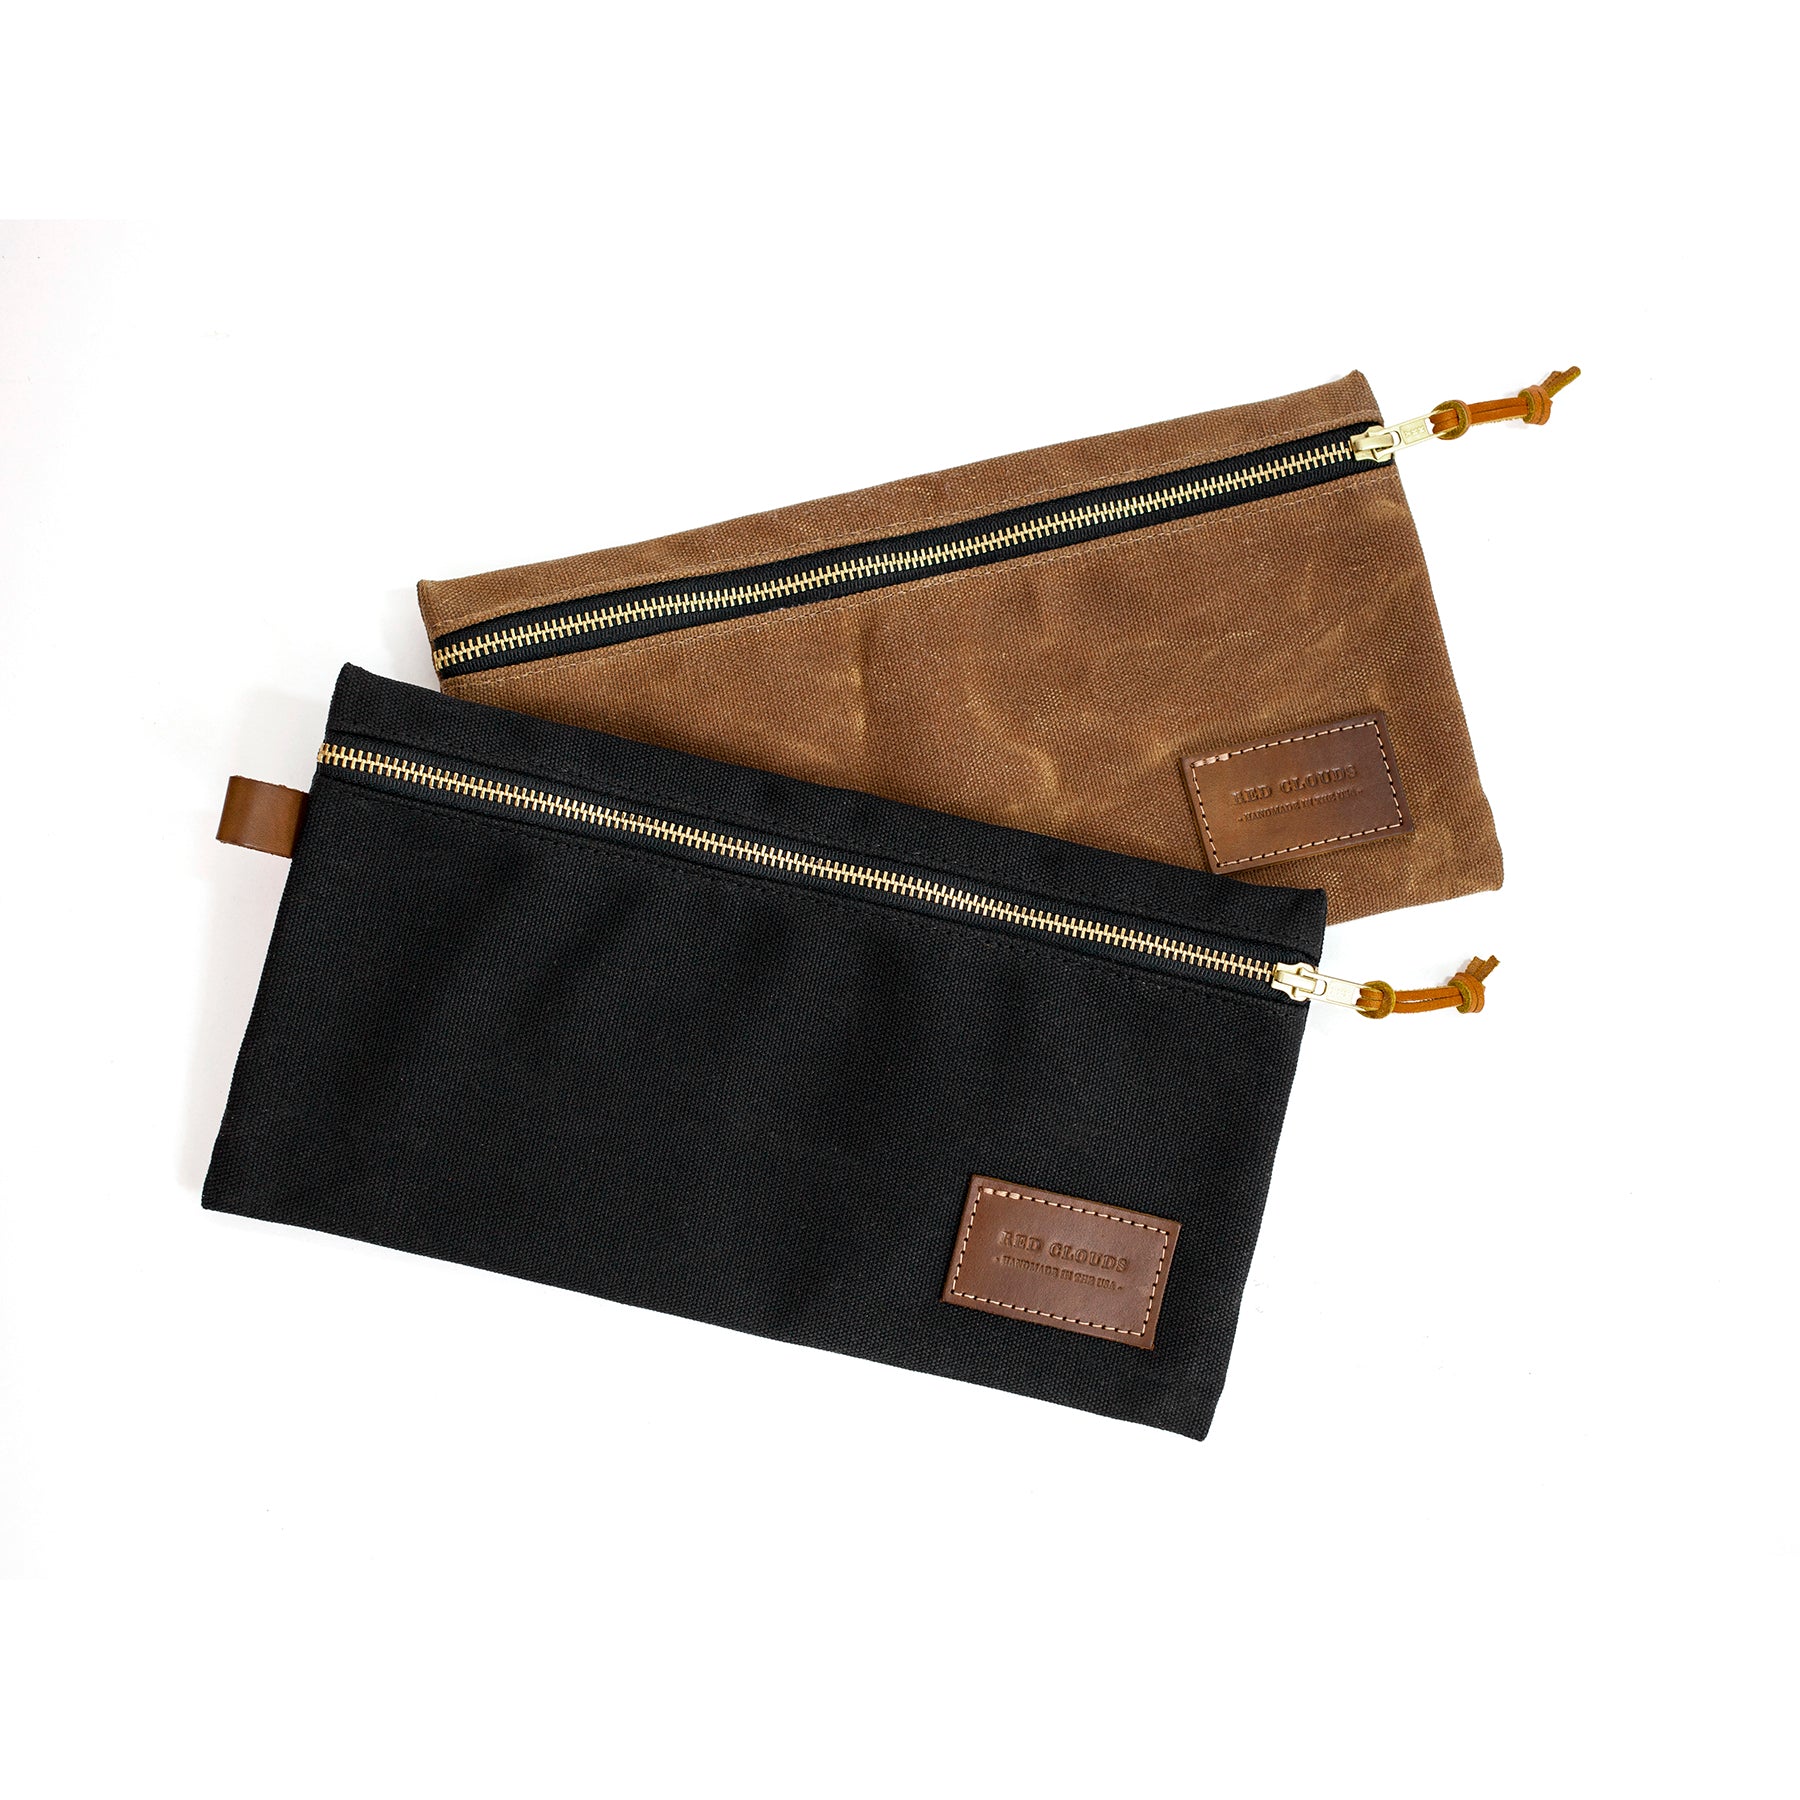 Canvas and Leather Pencil Case, Leather Accessories